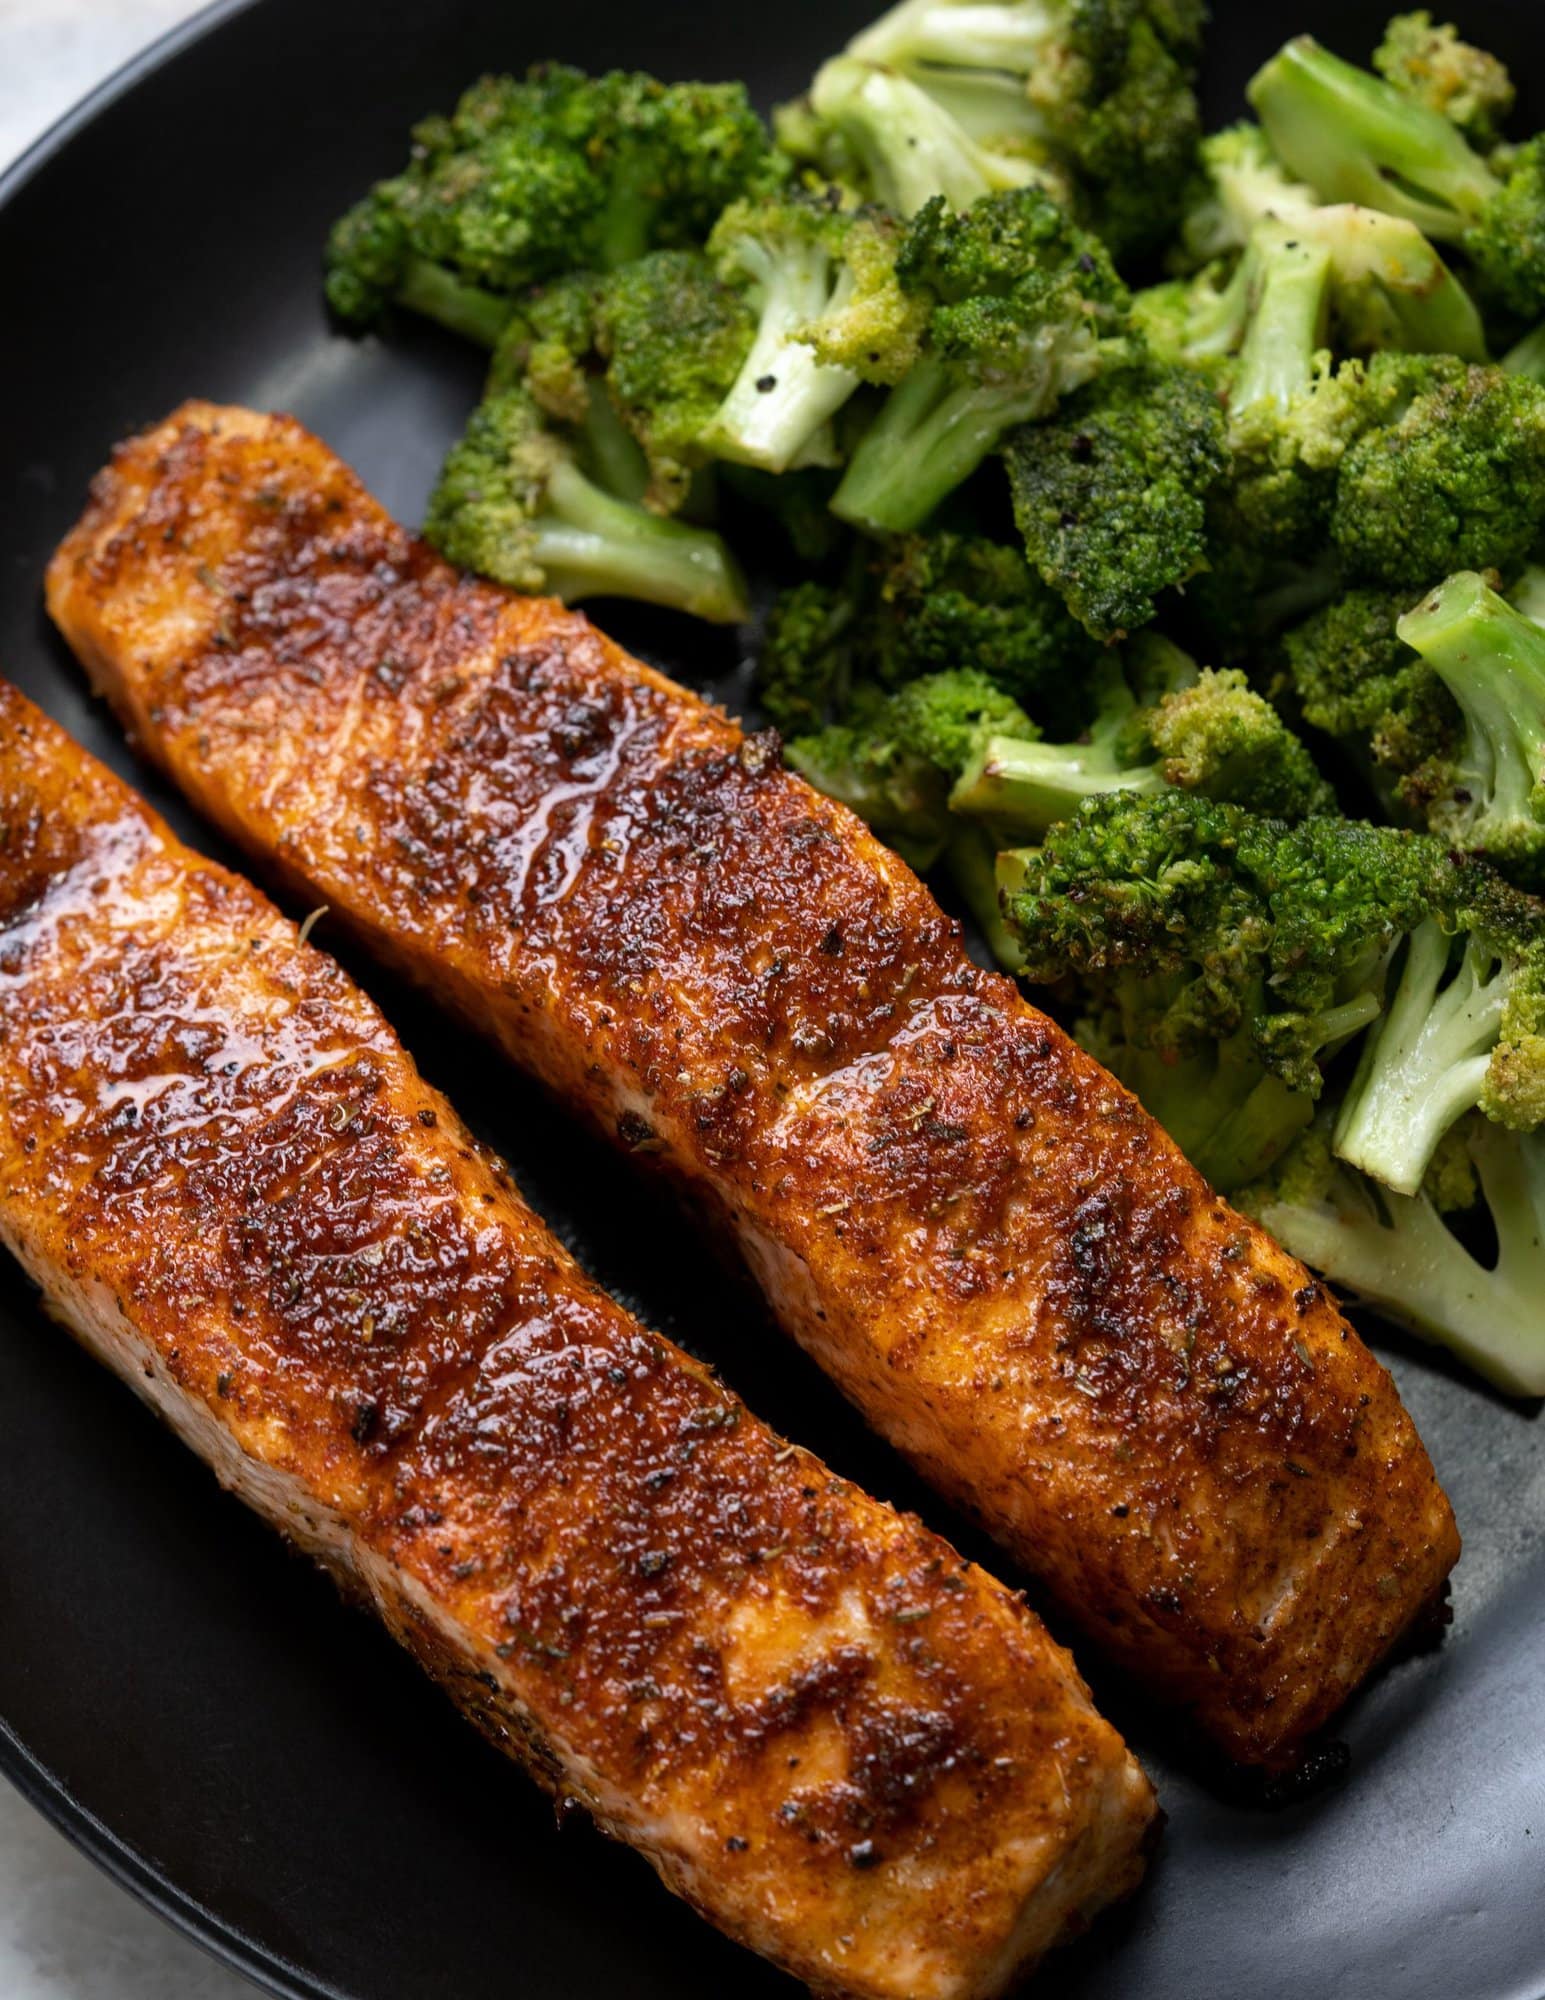 Air fried salmon with a crusty skin on top, served with roasted broccoli on a black plate.